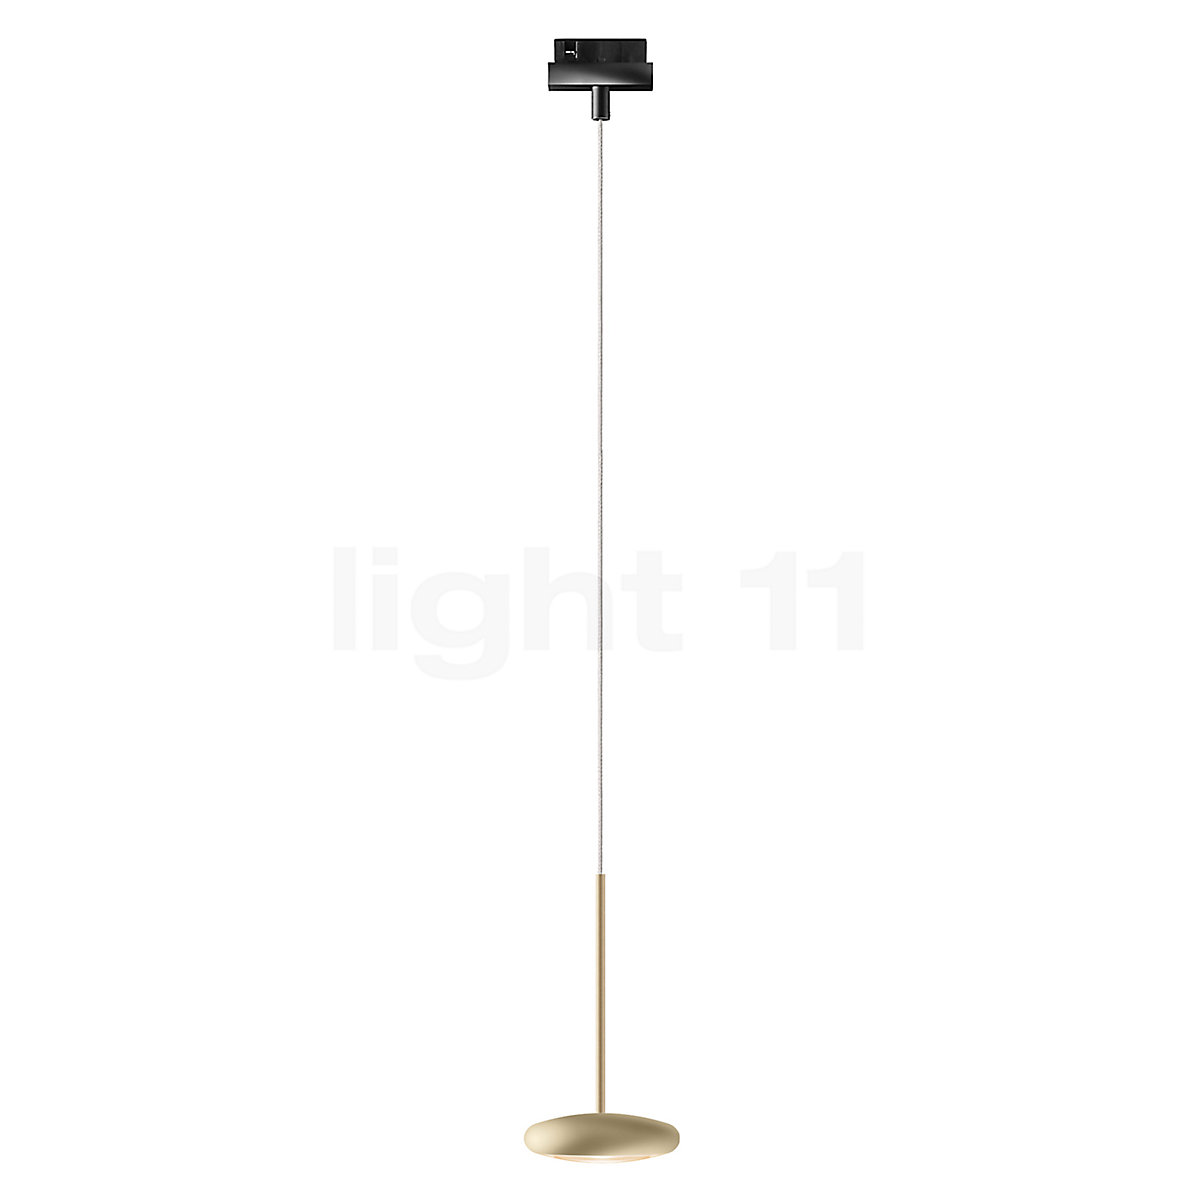 Buy Bruck LED Pendant at Track for Duolare Blop Light